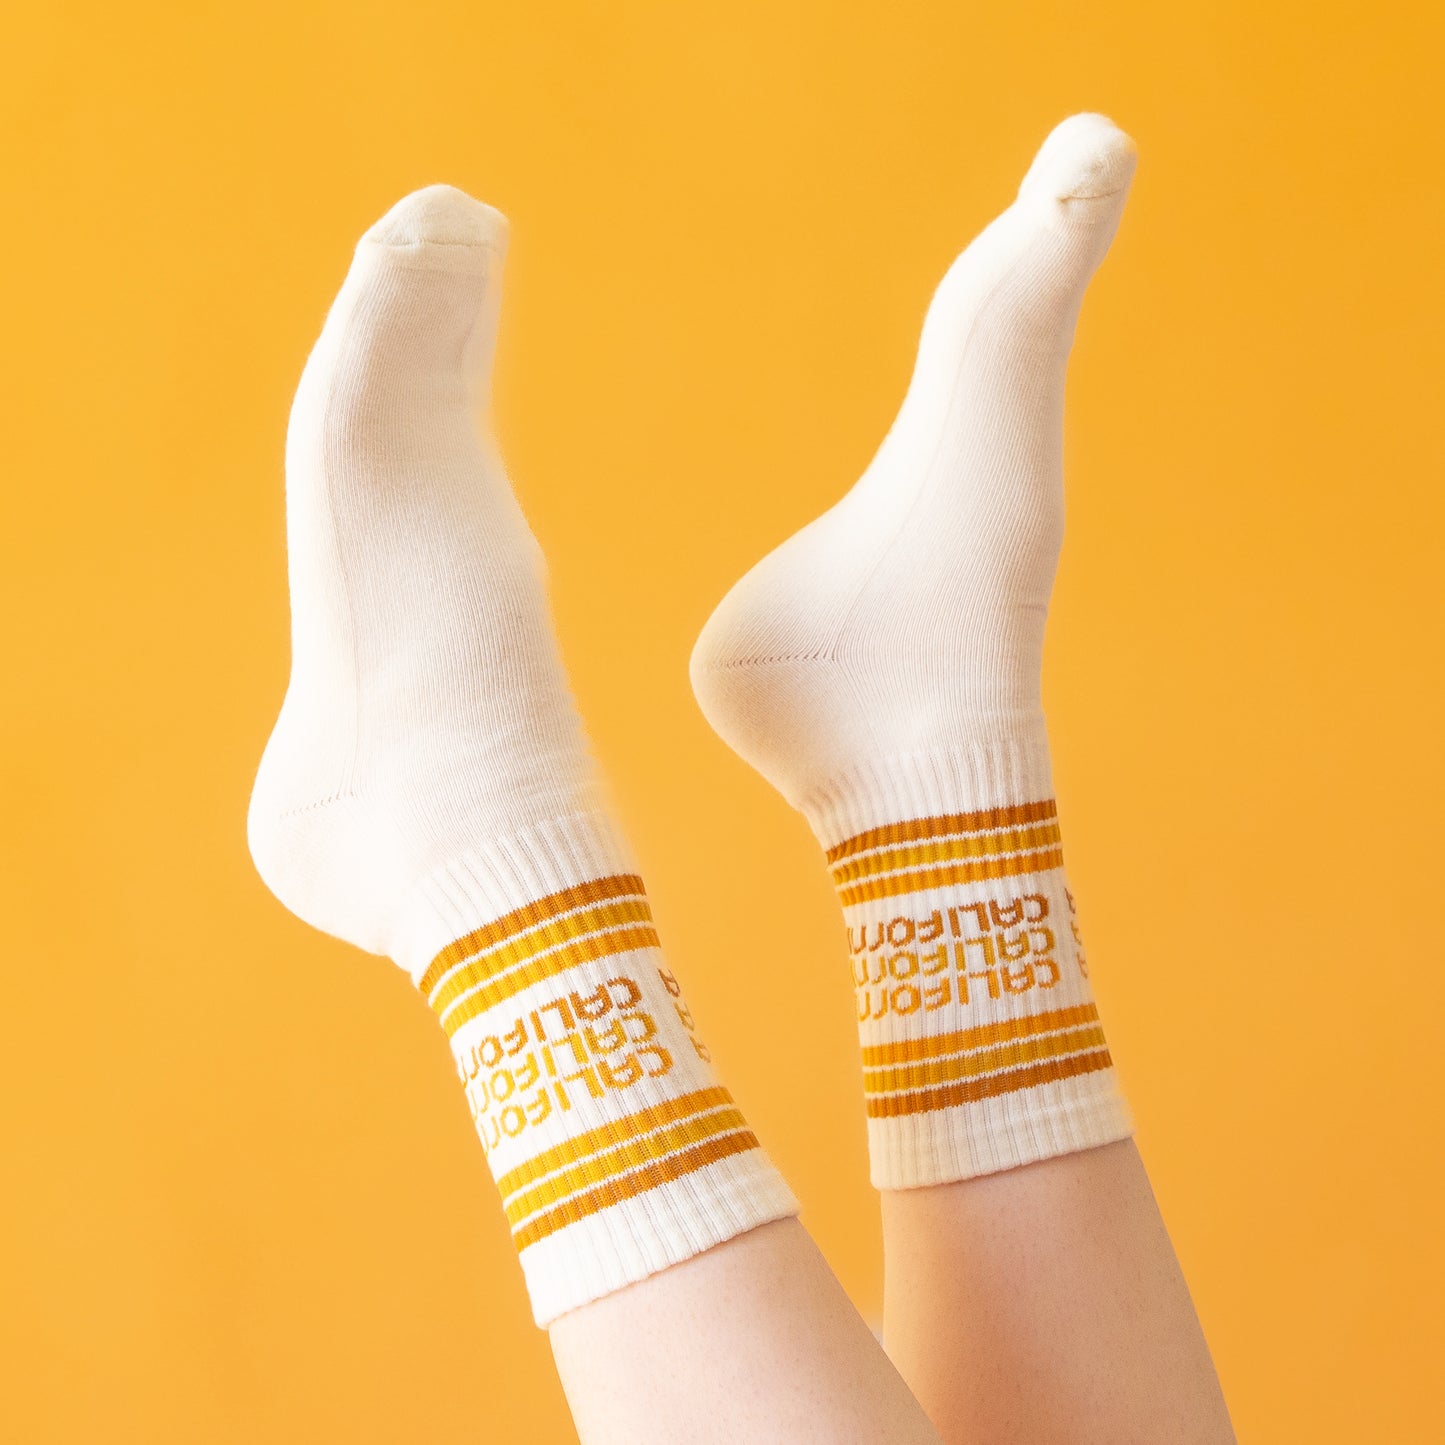 On a peach background is a white socks with rust, yellow and orange stripes and "california" printed three times on the ankle.'